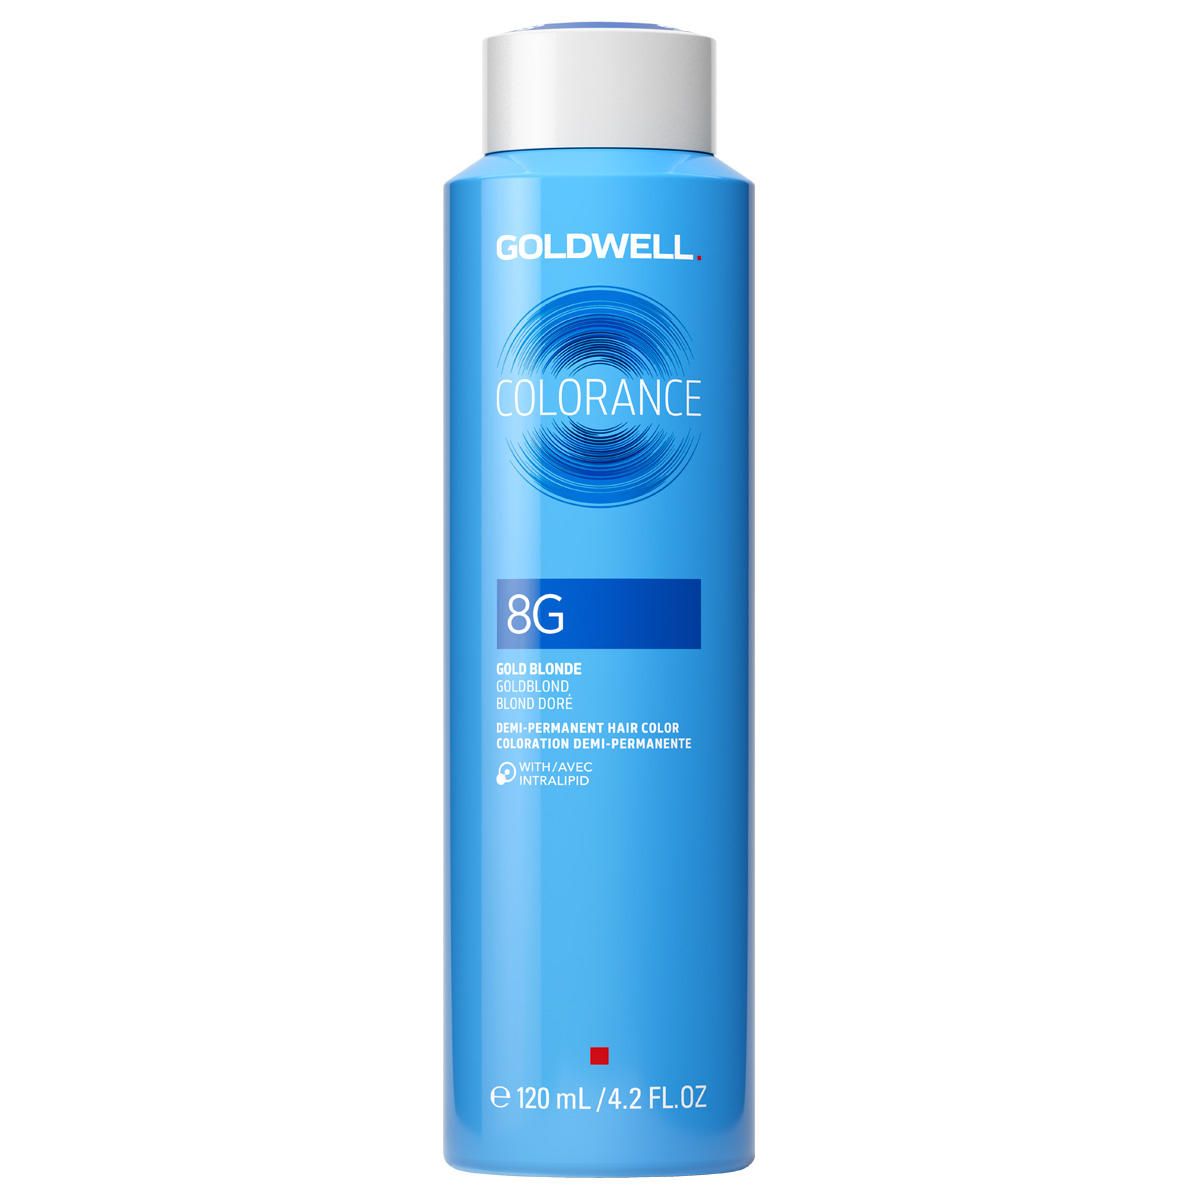 Goldwell Colorance Demi-Permanent Hair Color 8G Goldblond 120 ml - 1